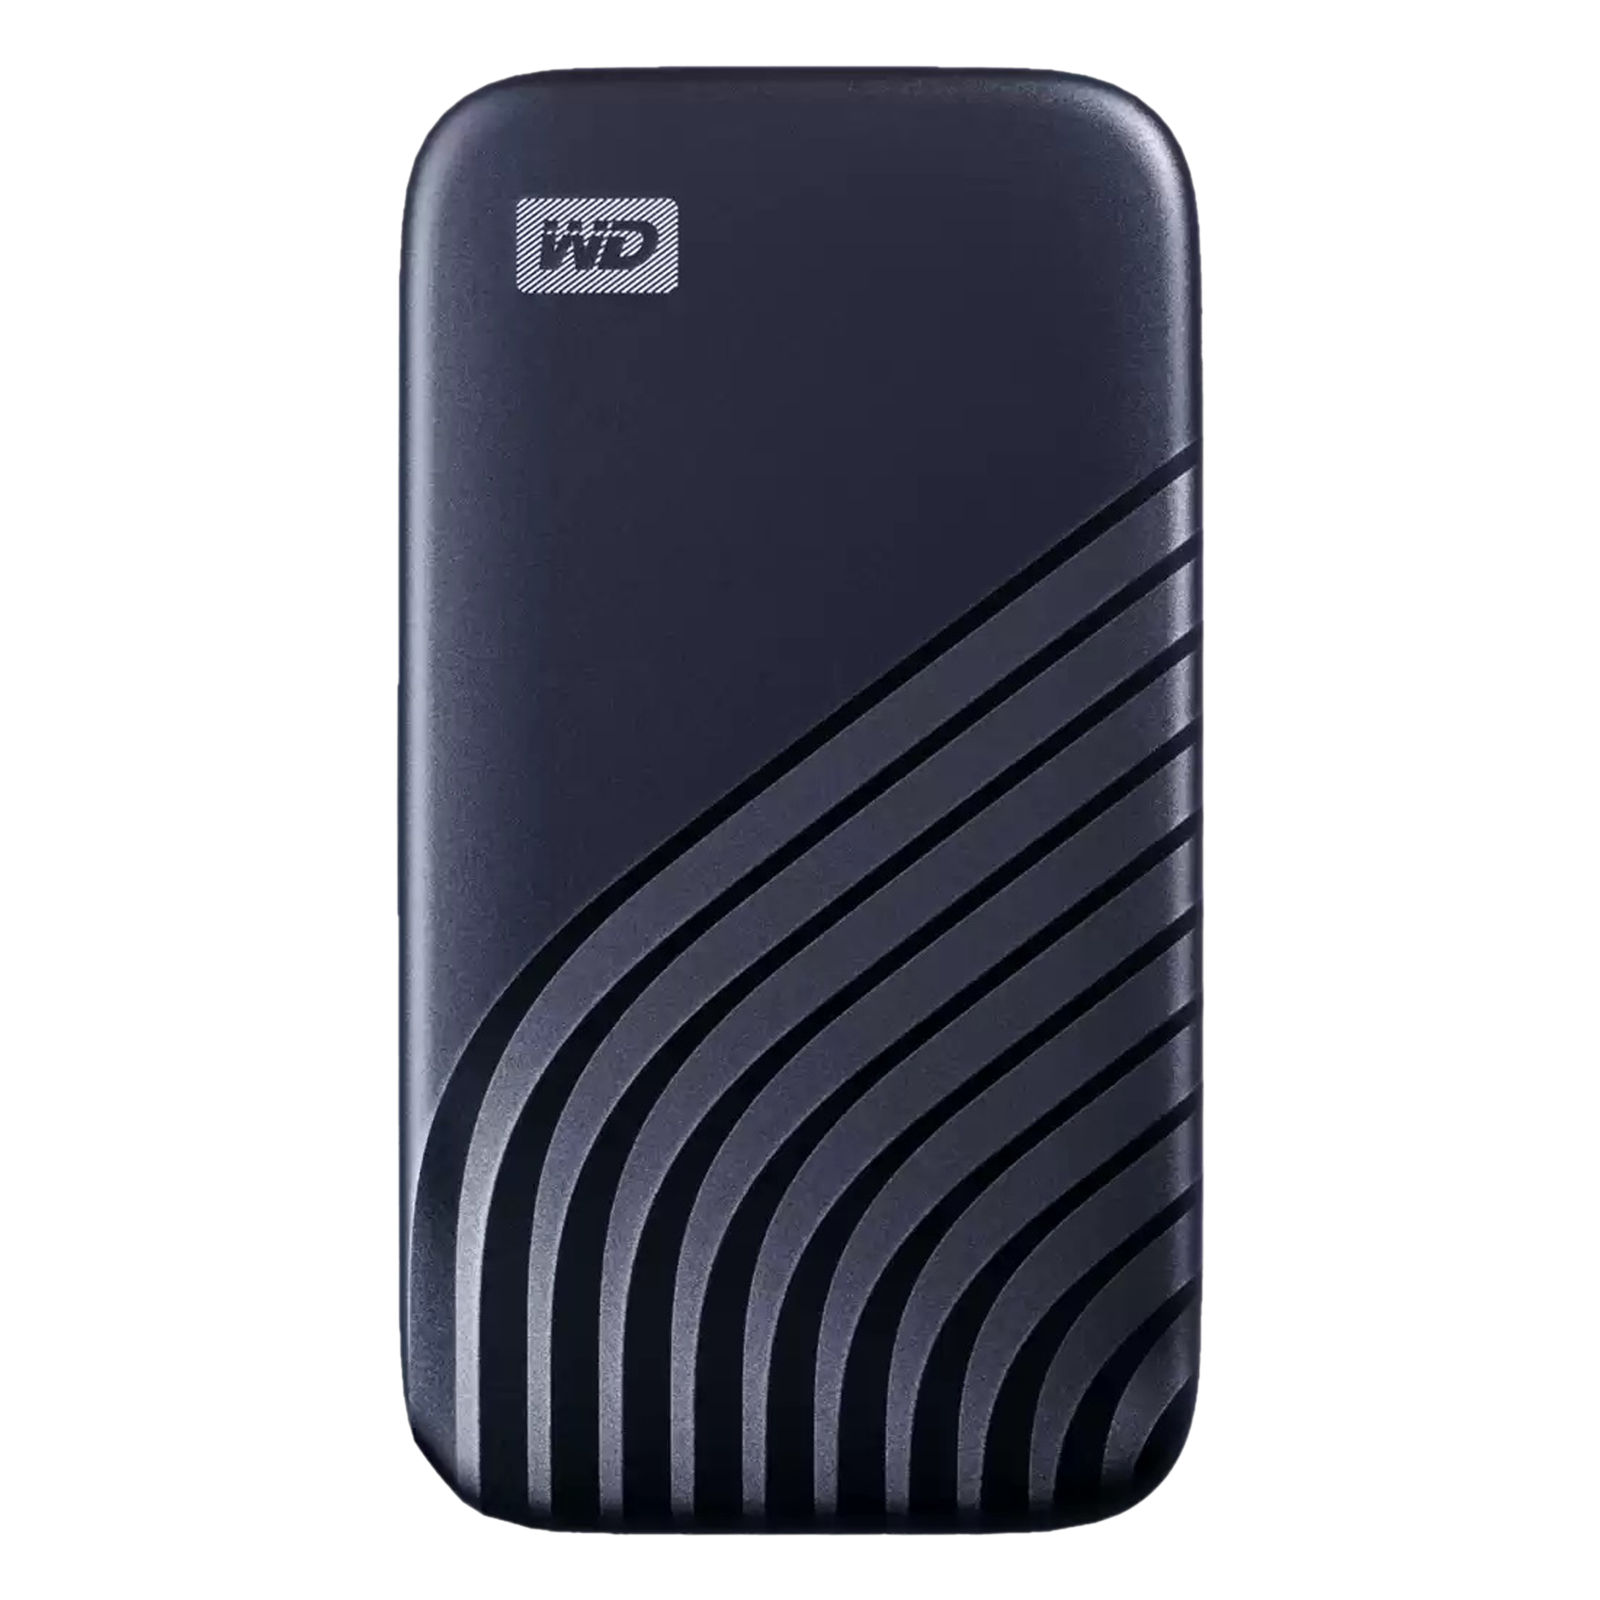 Western Digital My Passport 500GB USB 3.2 (Type-C) Solid State Drive (Password Protection, WDBAGF5000ABL-WESN, Blue)